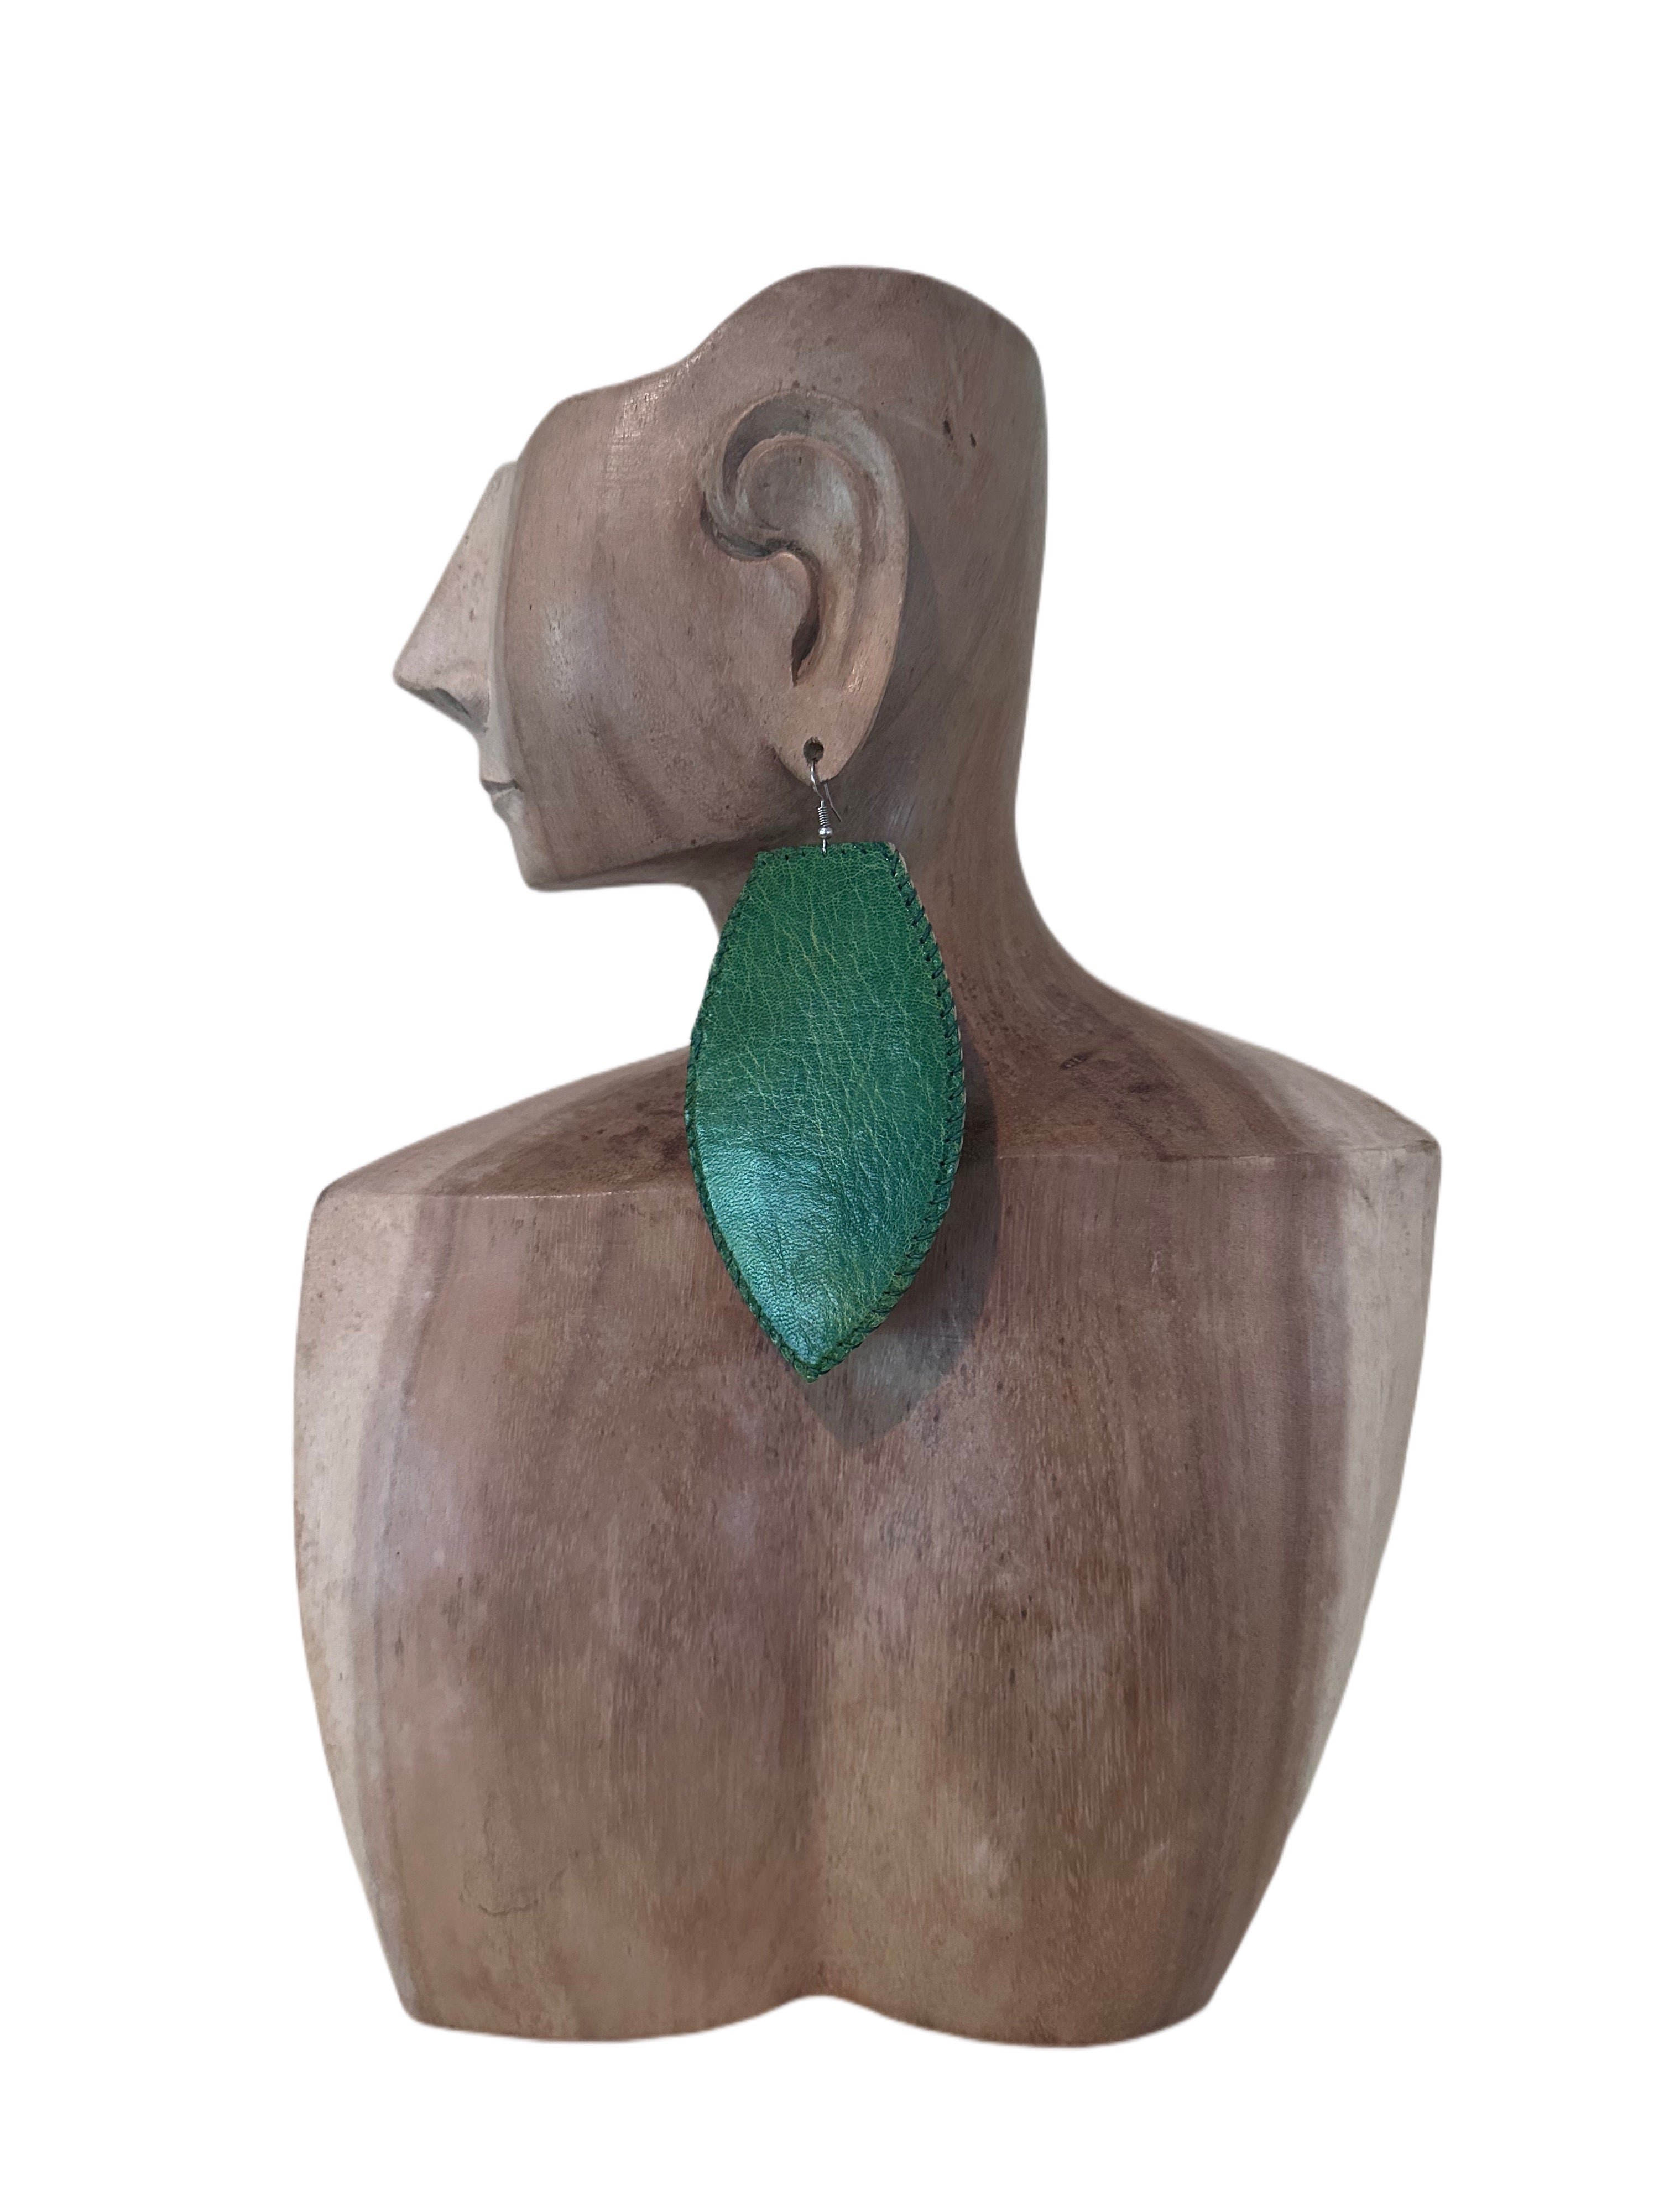 Large Leather Leaf Earring